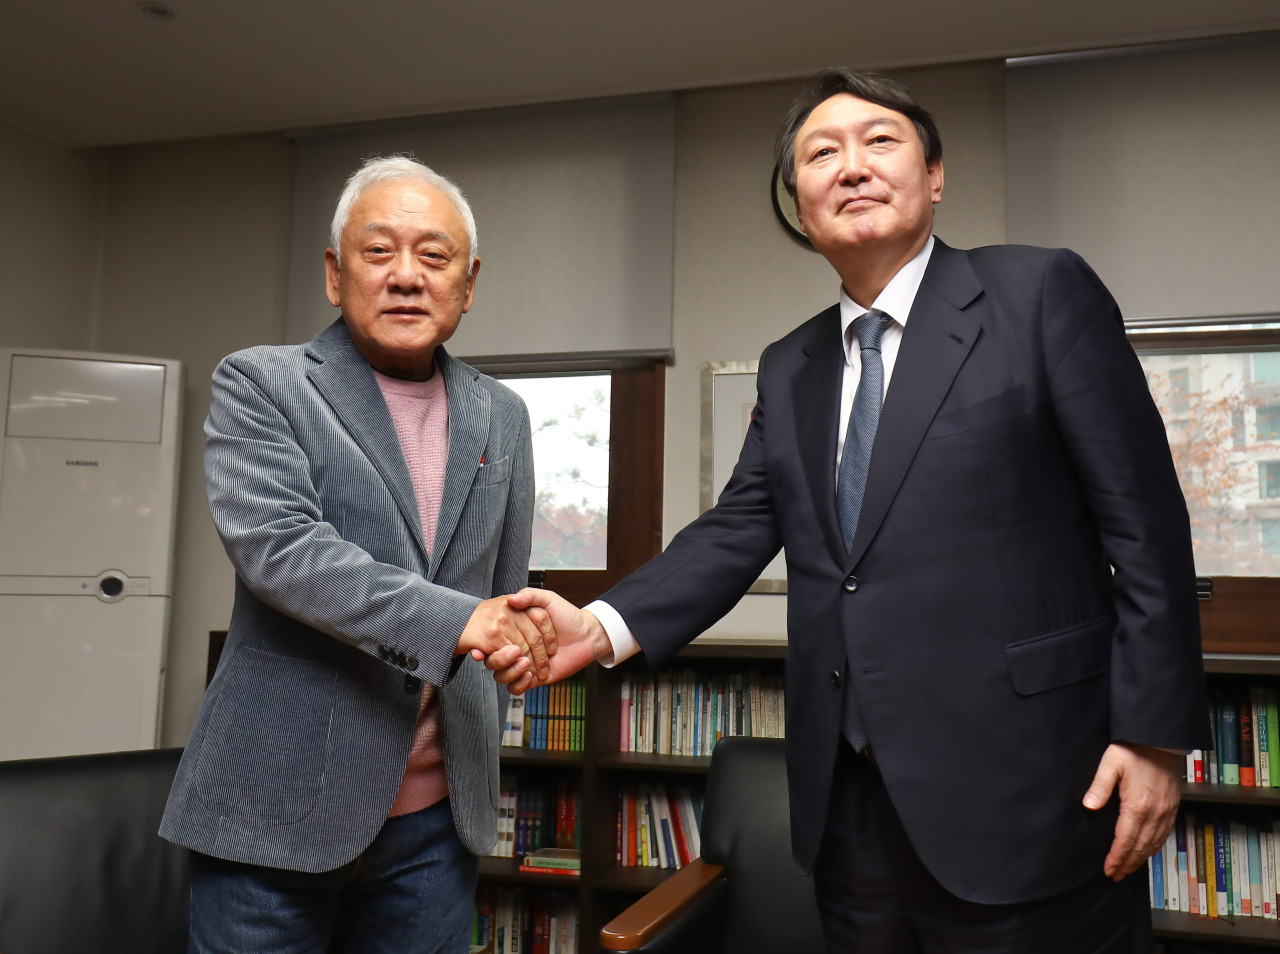 This photo provided by the National Assembly press corps shows Yoon Seok-youl (R), the presidential candidate of the main opposition People Power Party, shaking hands with Kim Han-gil at the latter's office in Seoul. (National Assembly)